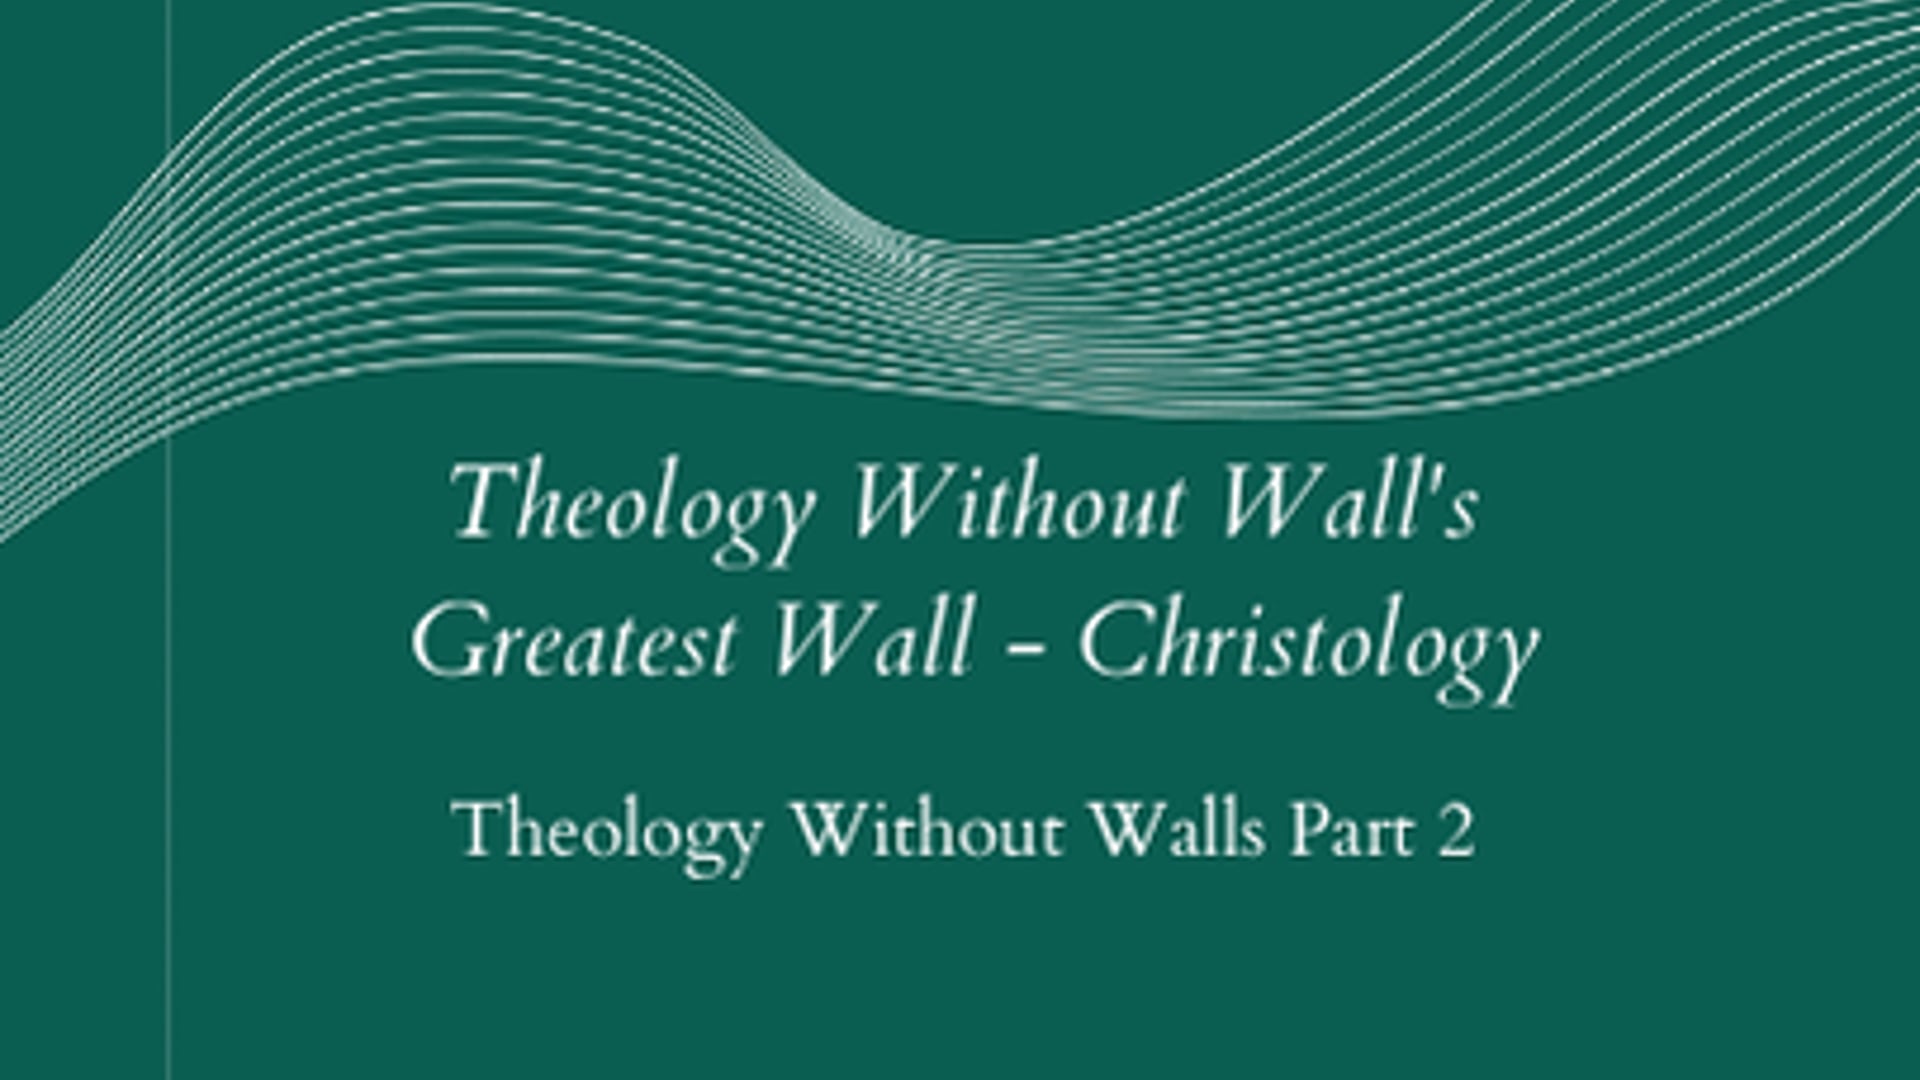 Theology Without Wall's Greatest Wall - Christology